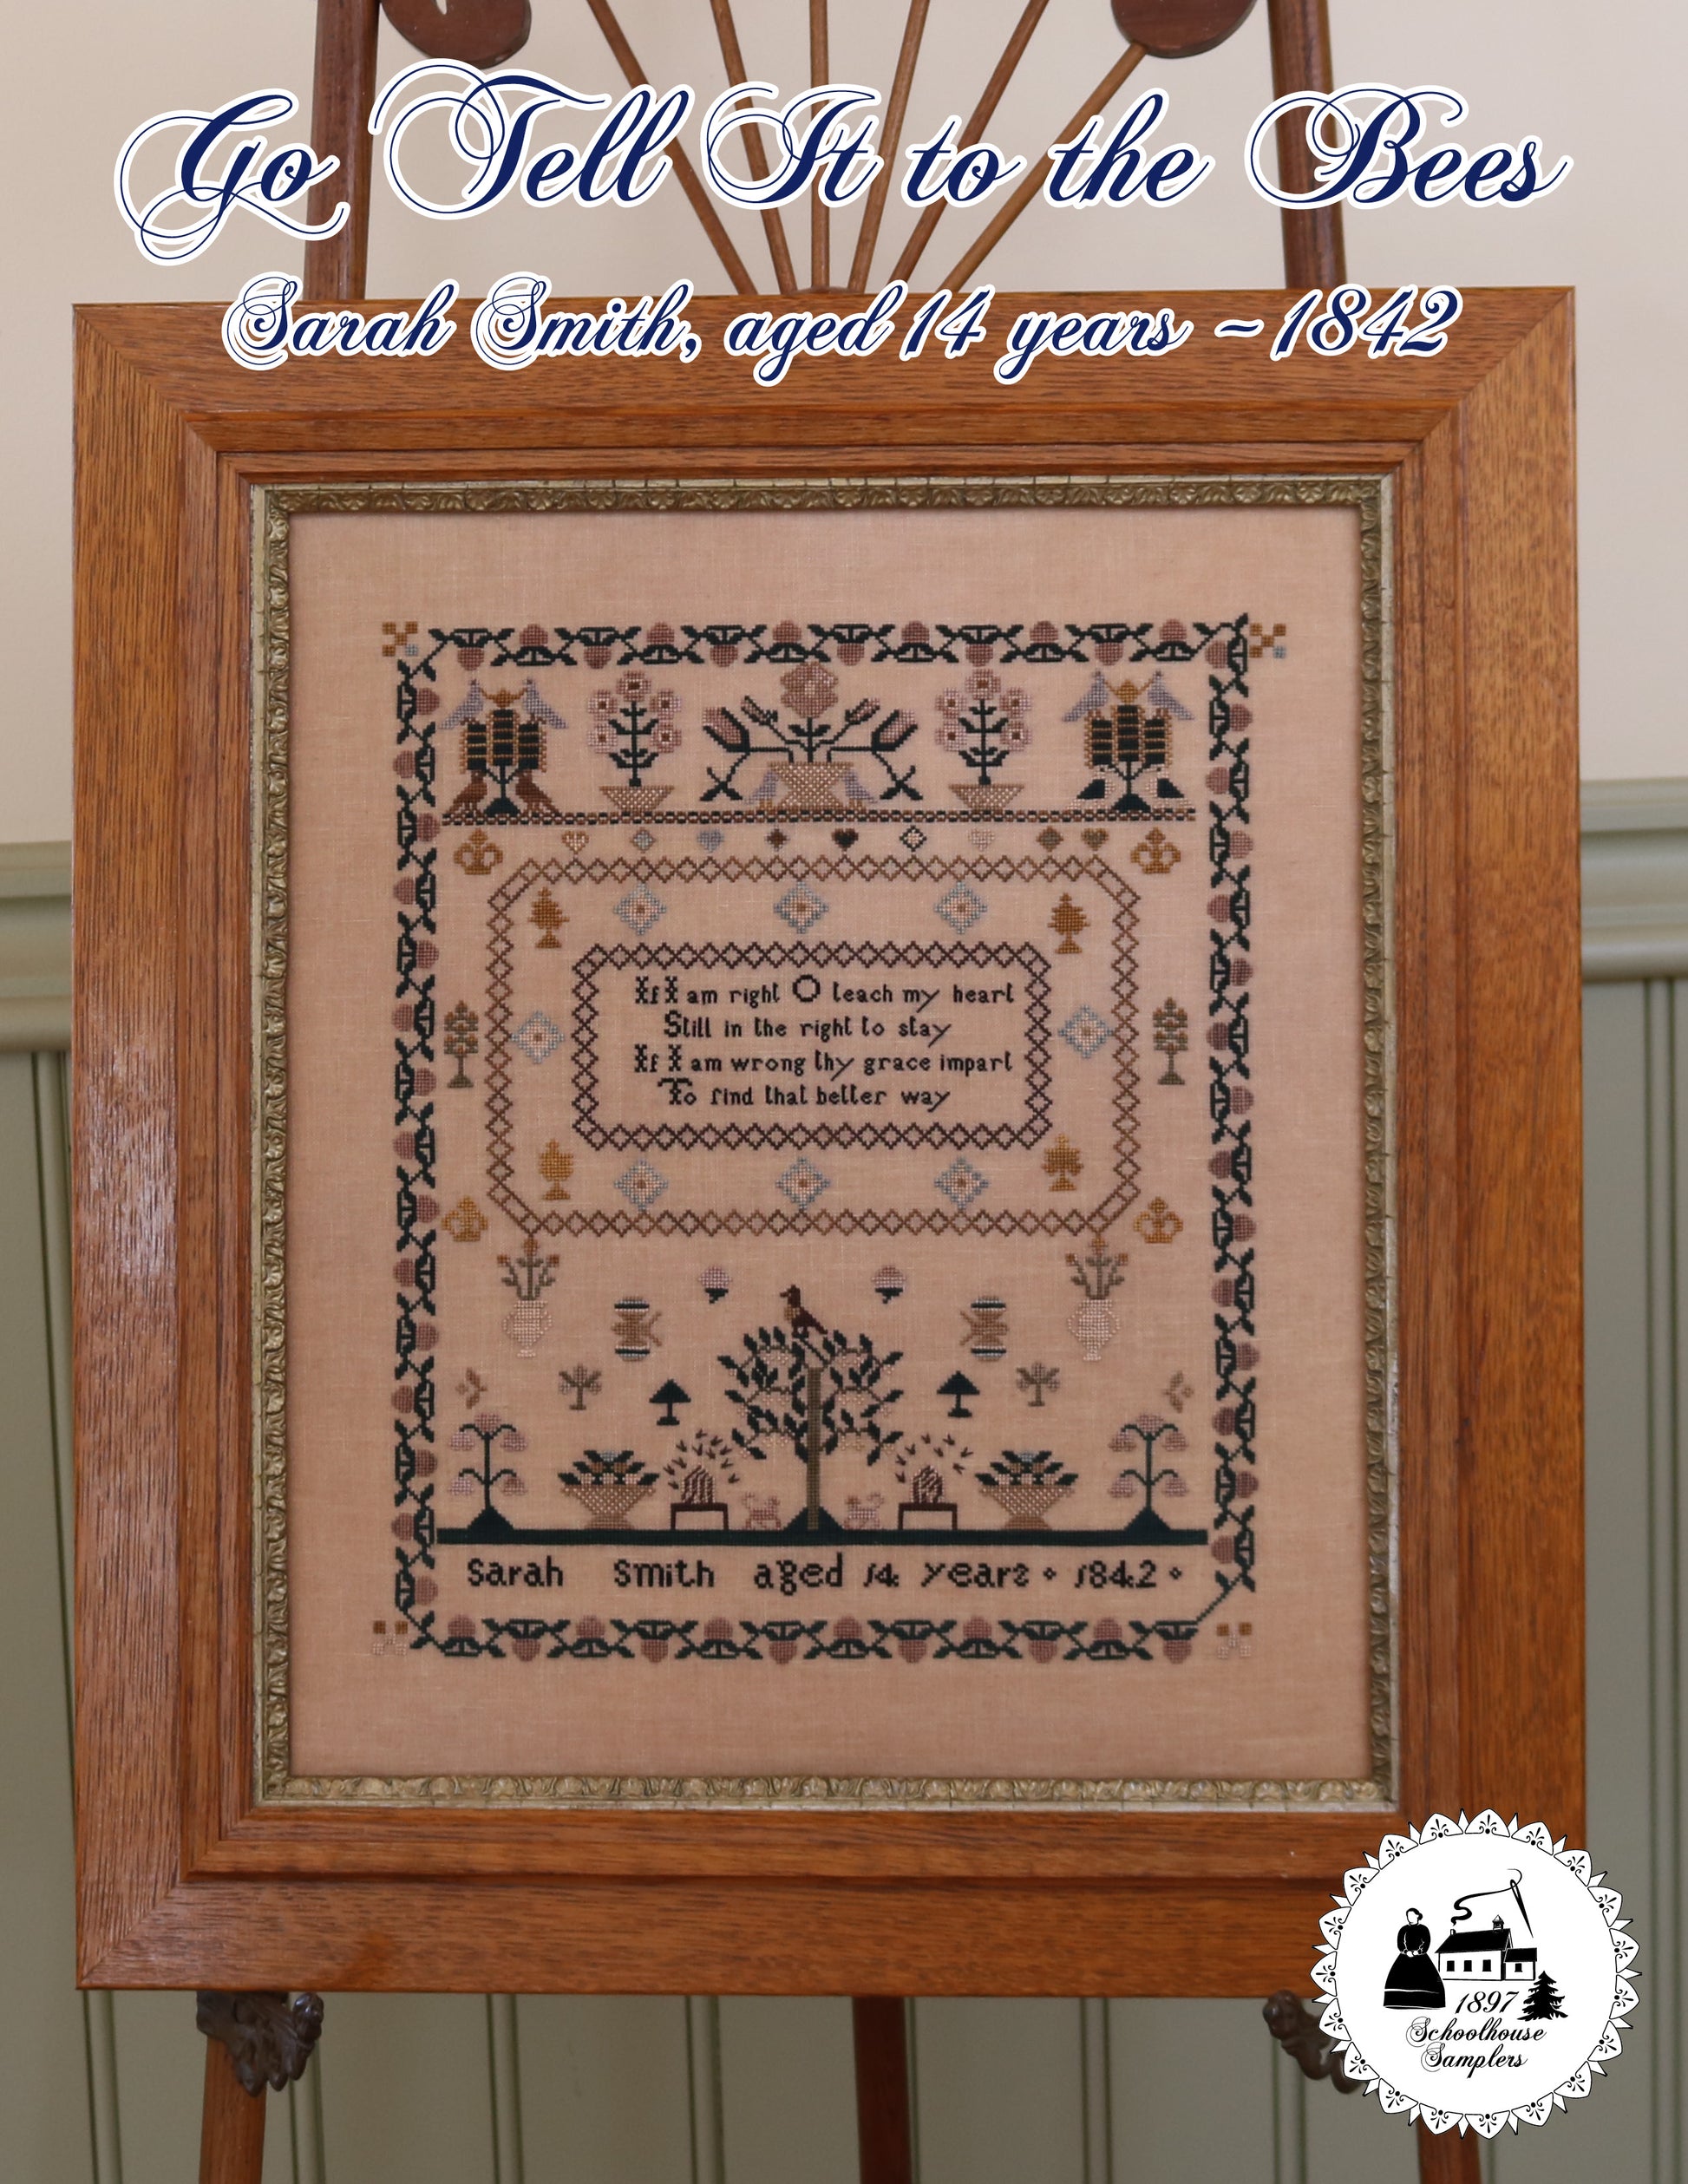 Go Tell It to the Bees - 1897 Schoolhouse Samplers - Cross Stitch Pattern, Needlecraft Patterns, The Crafty Grimalkin - A Cross Stitch Store